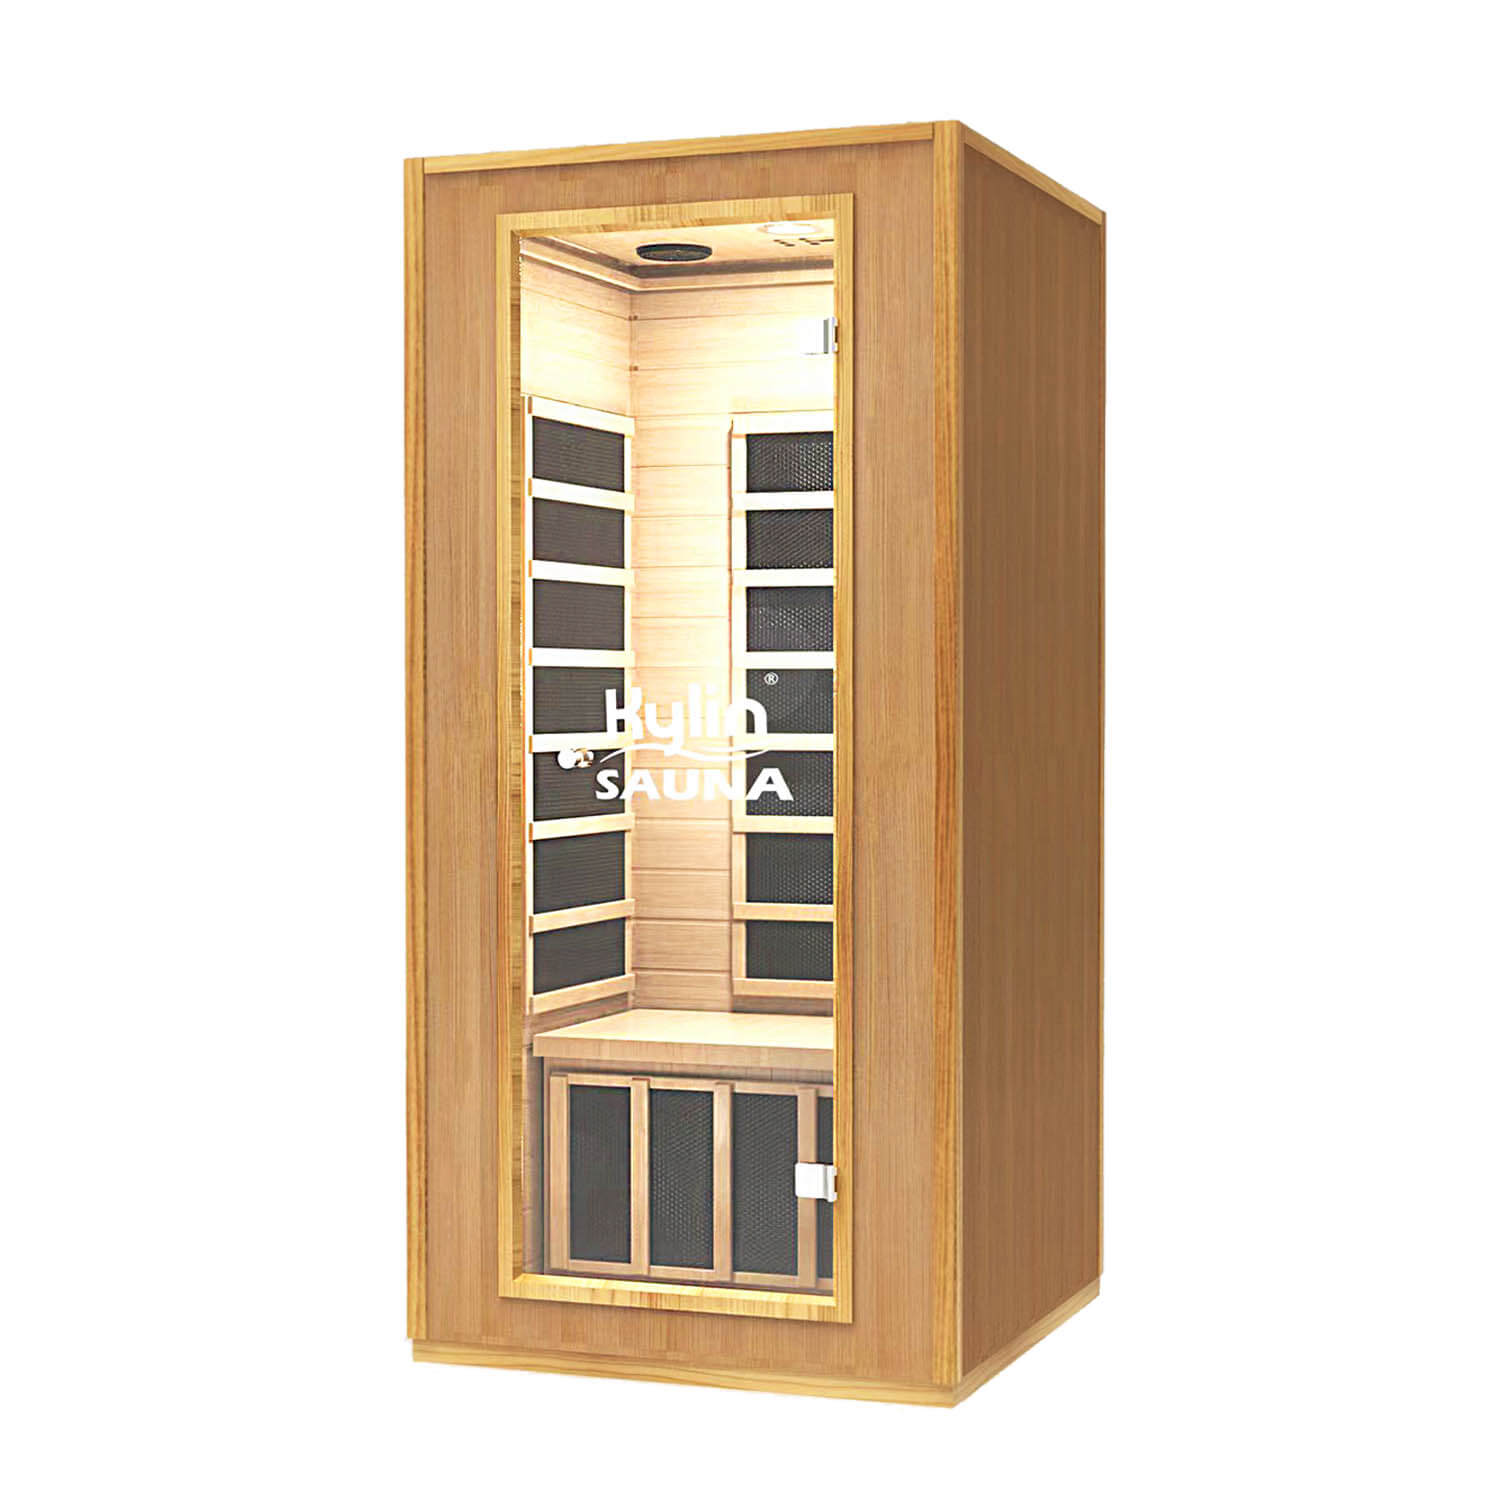 Kylin KY-1O6 Infrared Sauna 1 Person Portable Oak Limited Edition